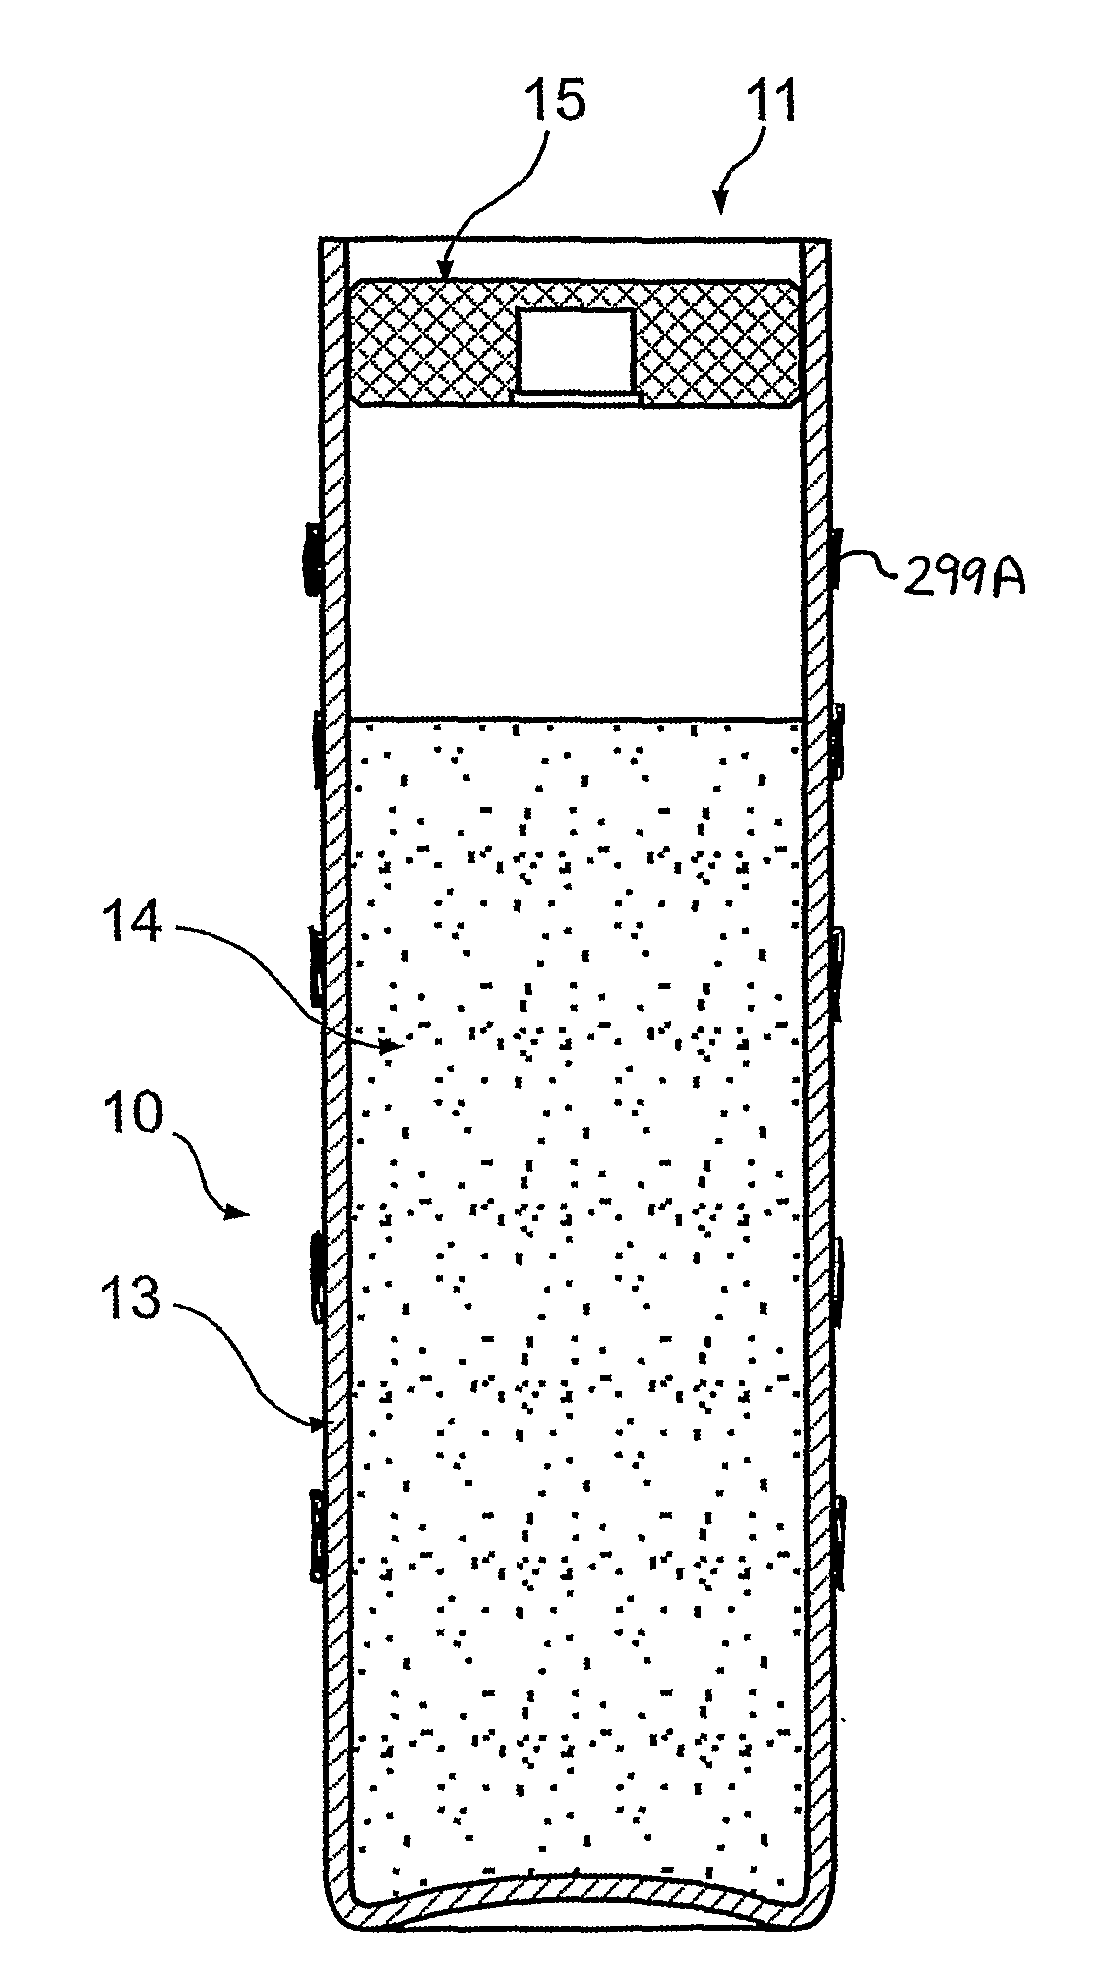 Fluid Delivery System